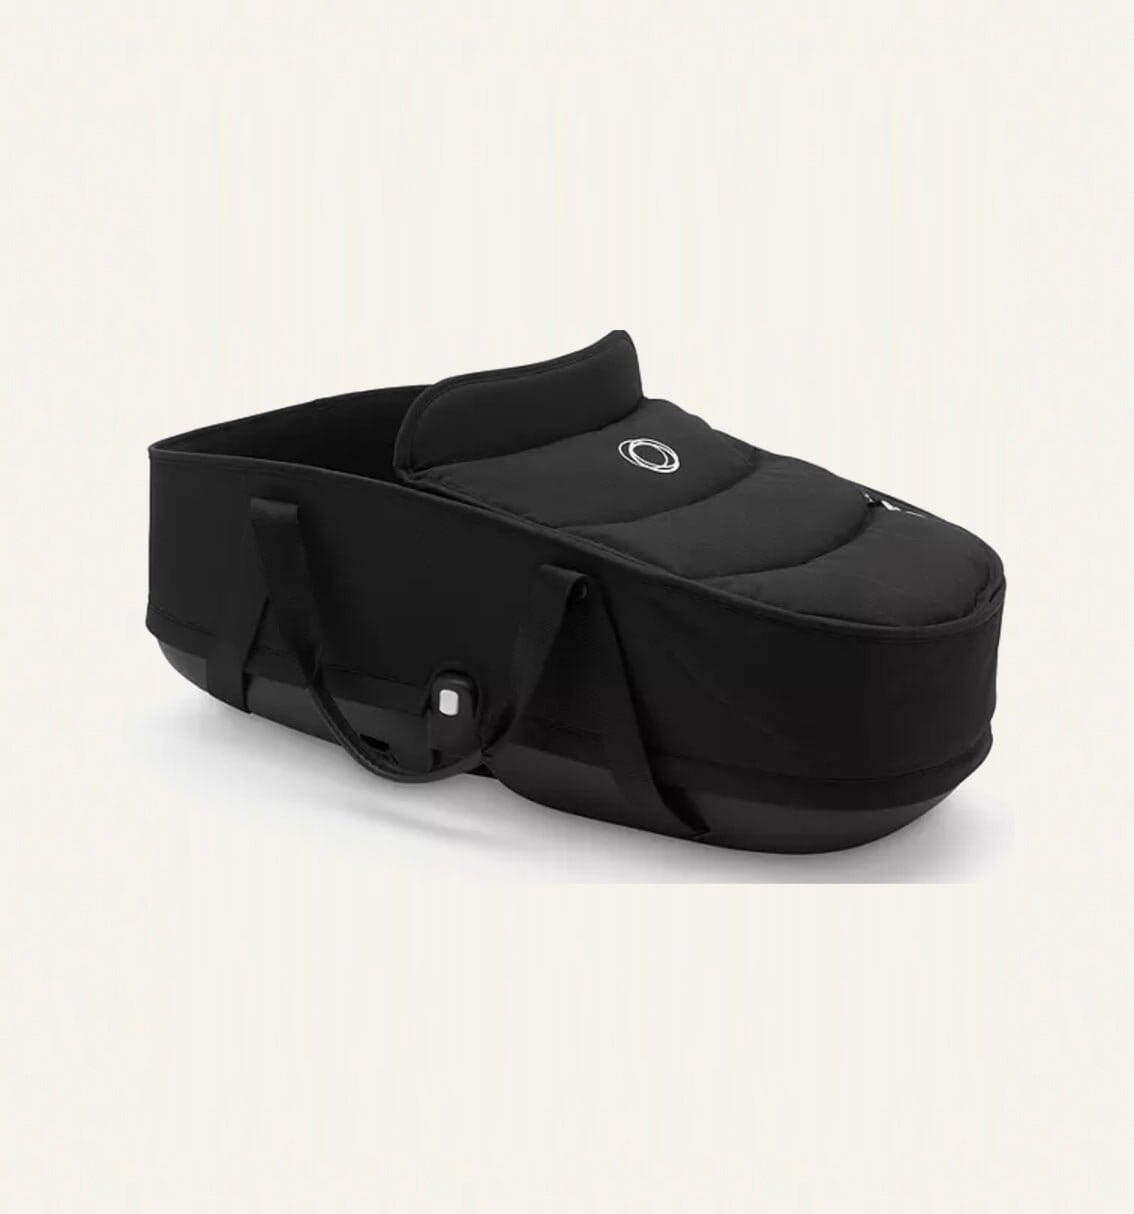 Rent a Bugaboo Bee Carrycot for just £22 per month on Baboodle.